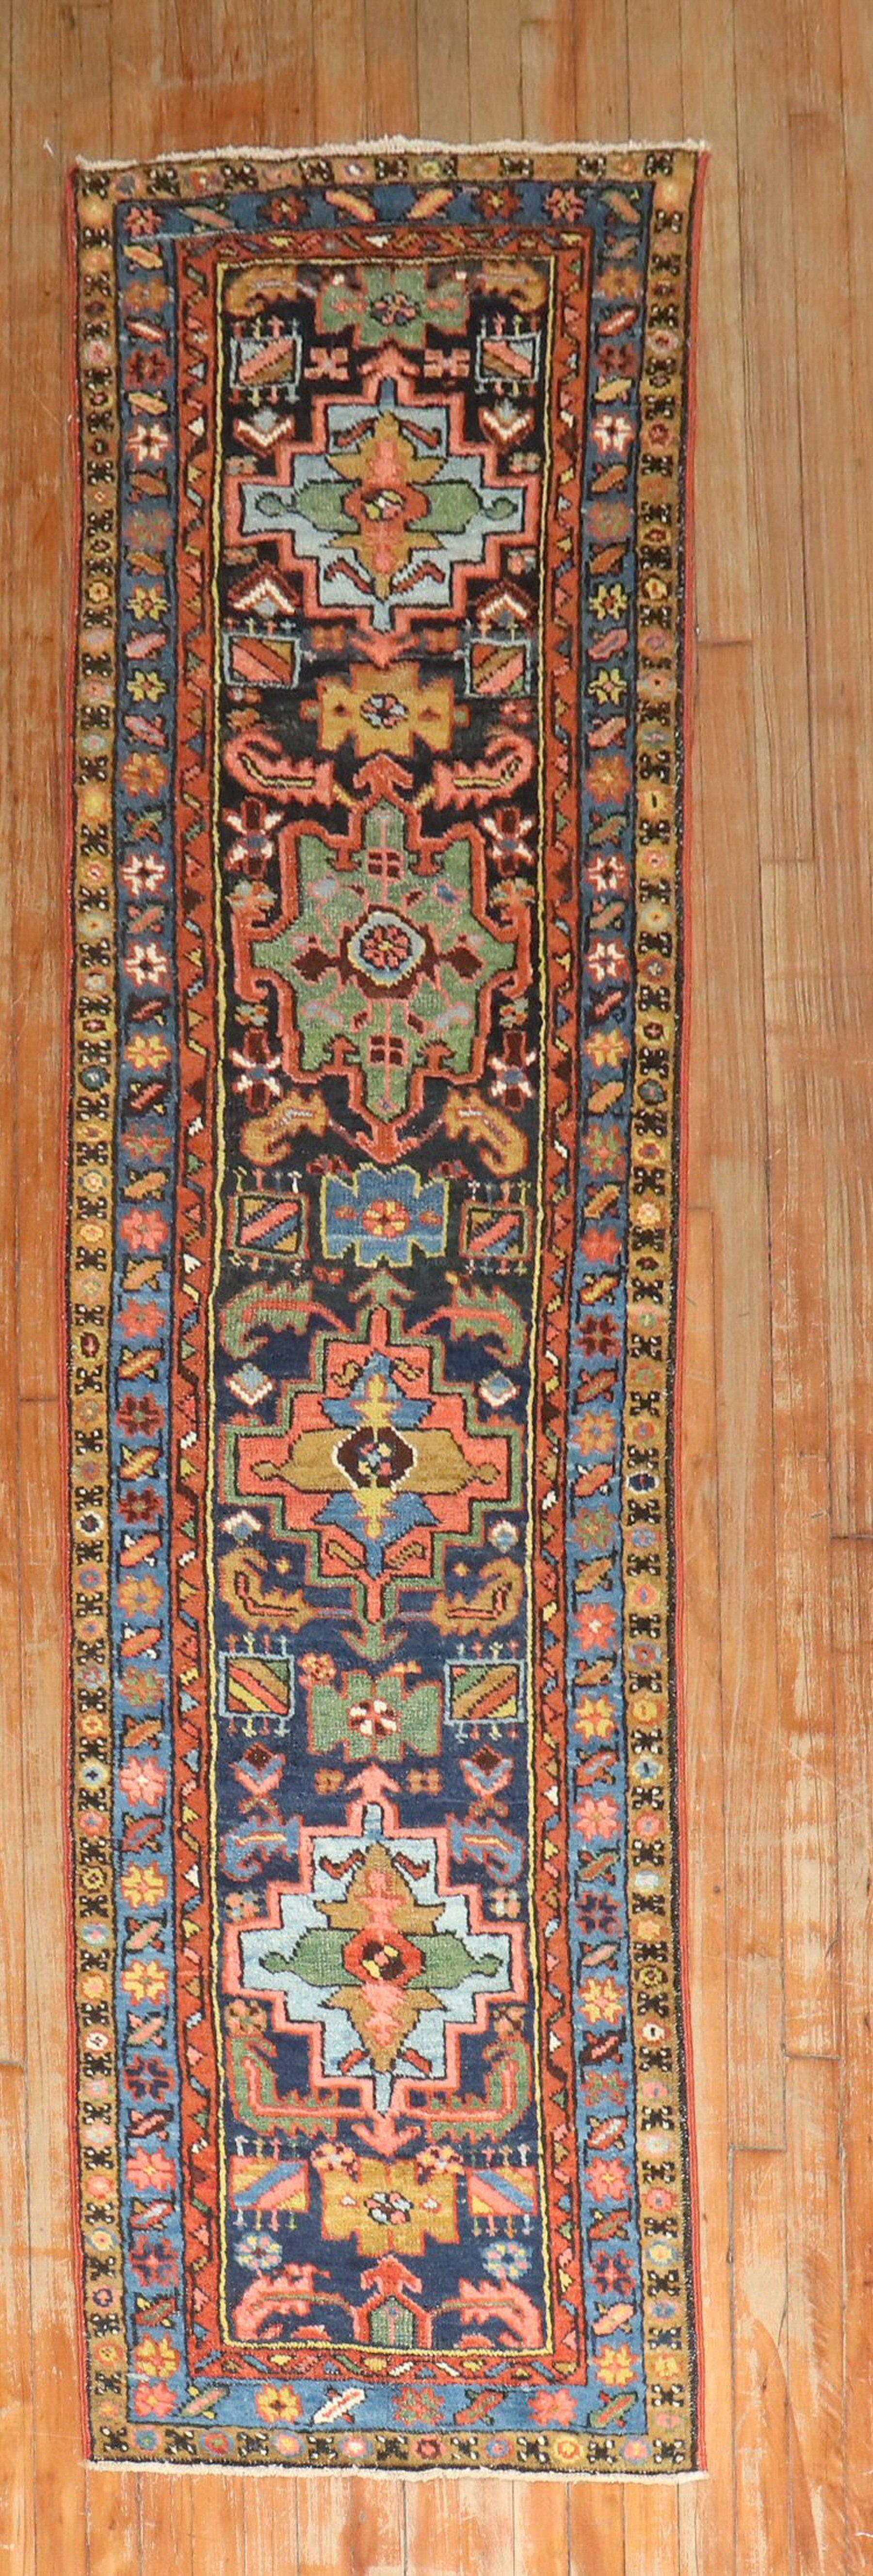 Colorful antique Persian Heriz Karadja runner from the 2nd quarter of the 20th century with an all-over geometric motif on a navy blue ground.

2'3'' x 8'6''.